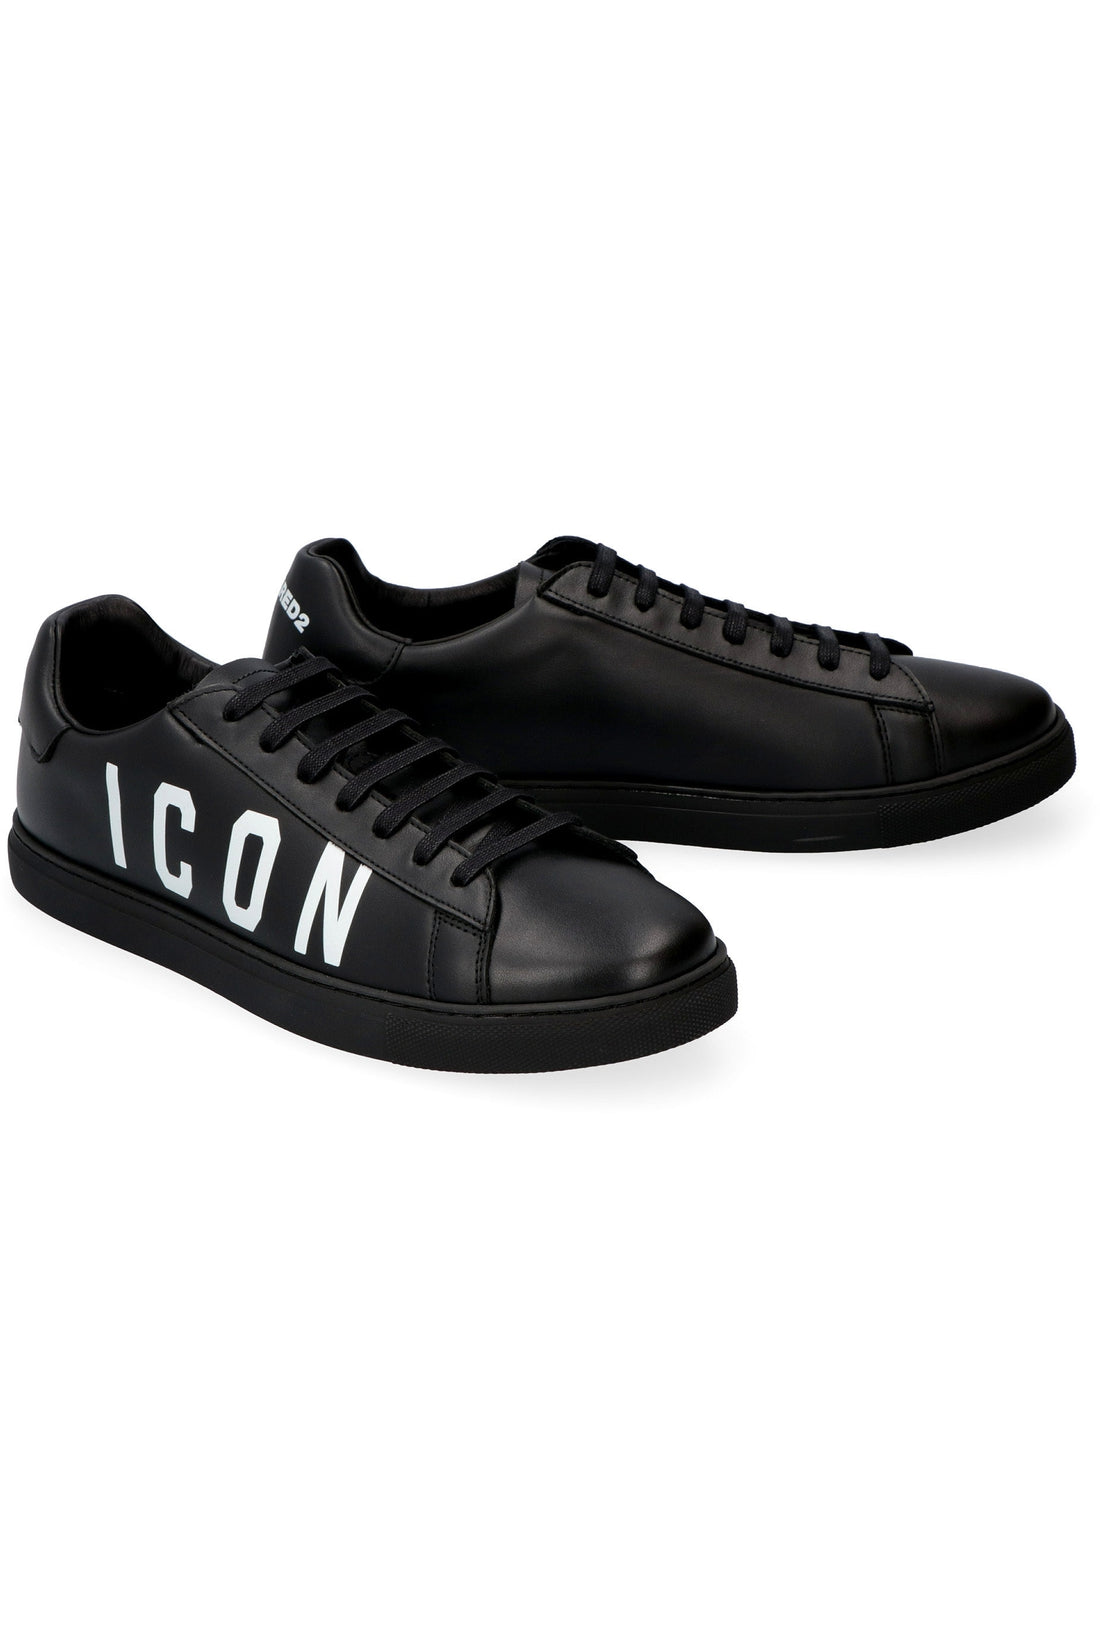 Dsquared2-OUTLET-SALE-New Tennis leather low-top sneakers-ARCHIVIST